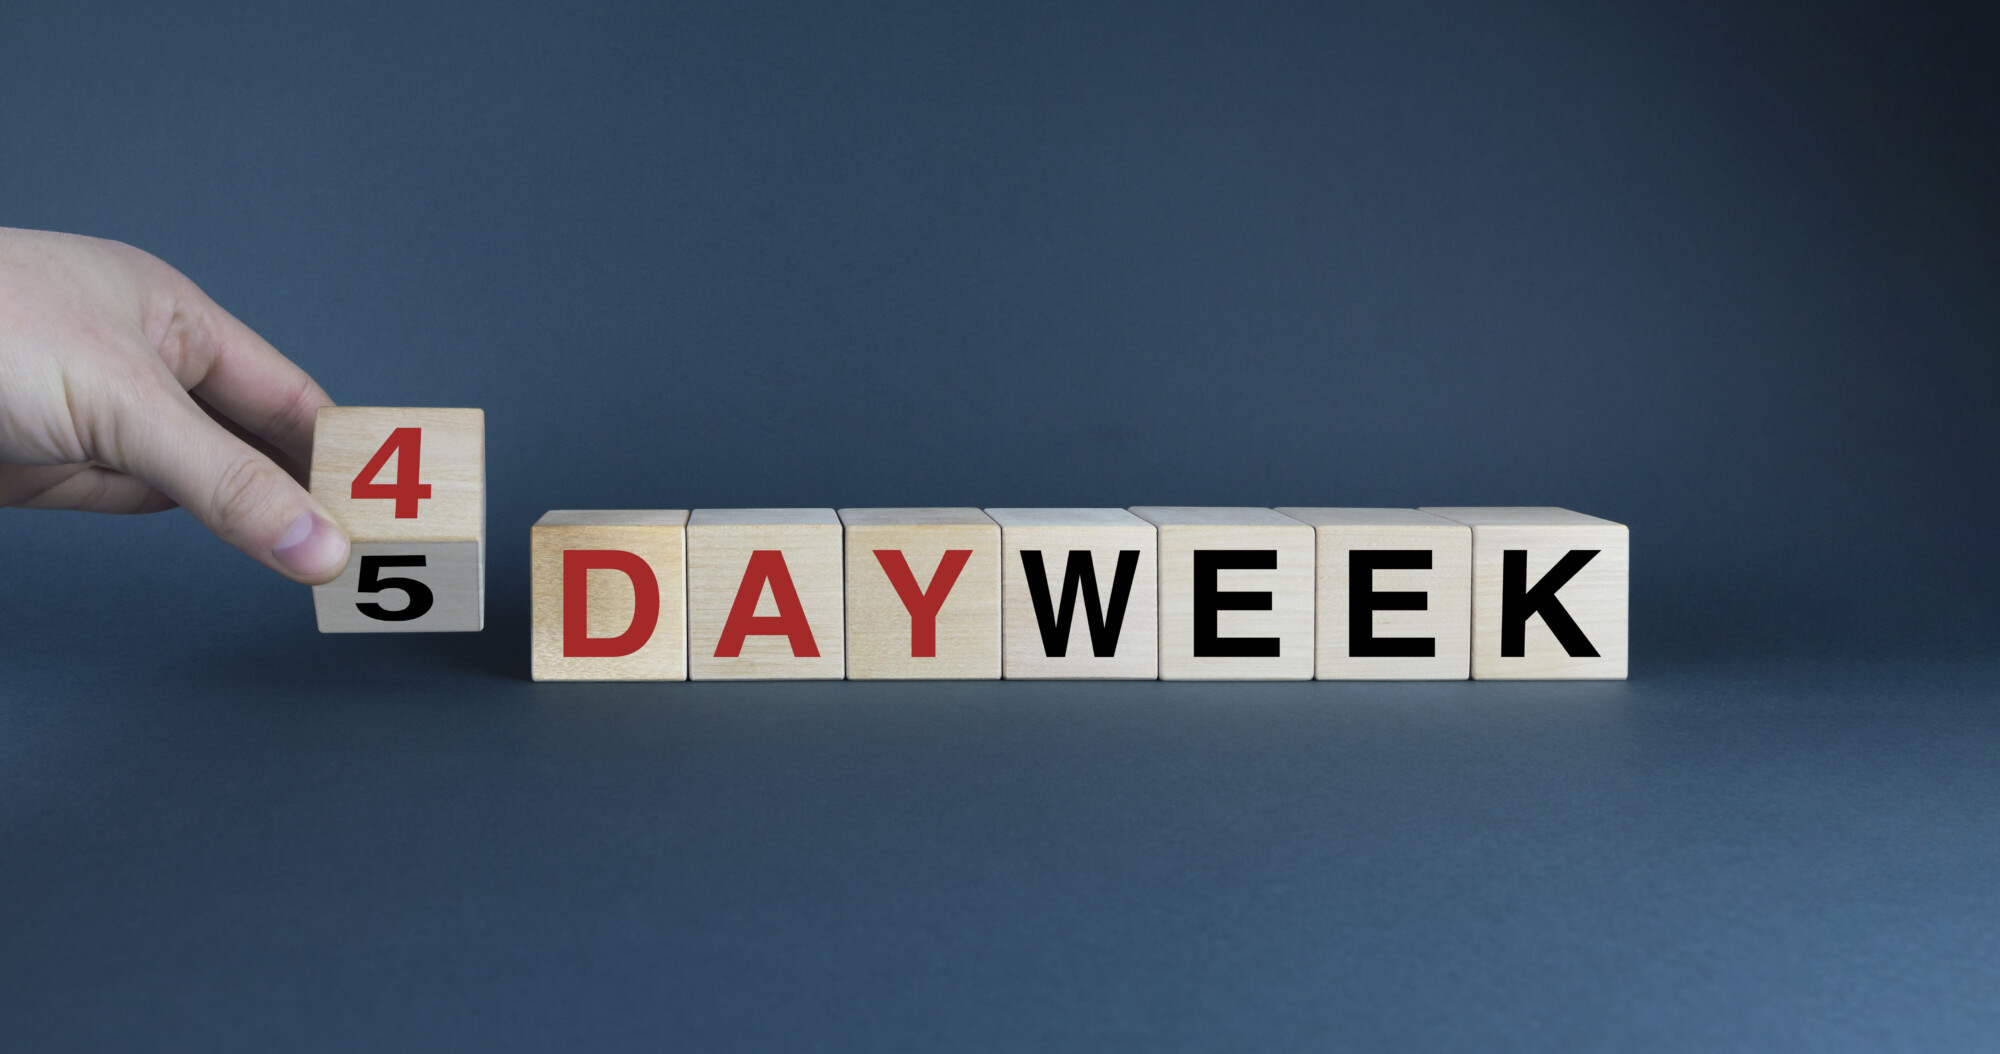 4 or 5 day week. The cubes form the choice words 4 or 5 day week. Employment and business concept, Five-day or Four-day workweek